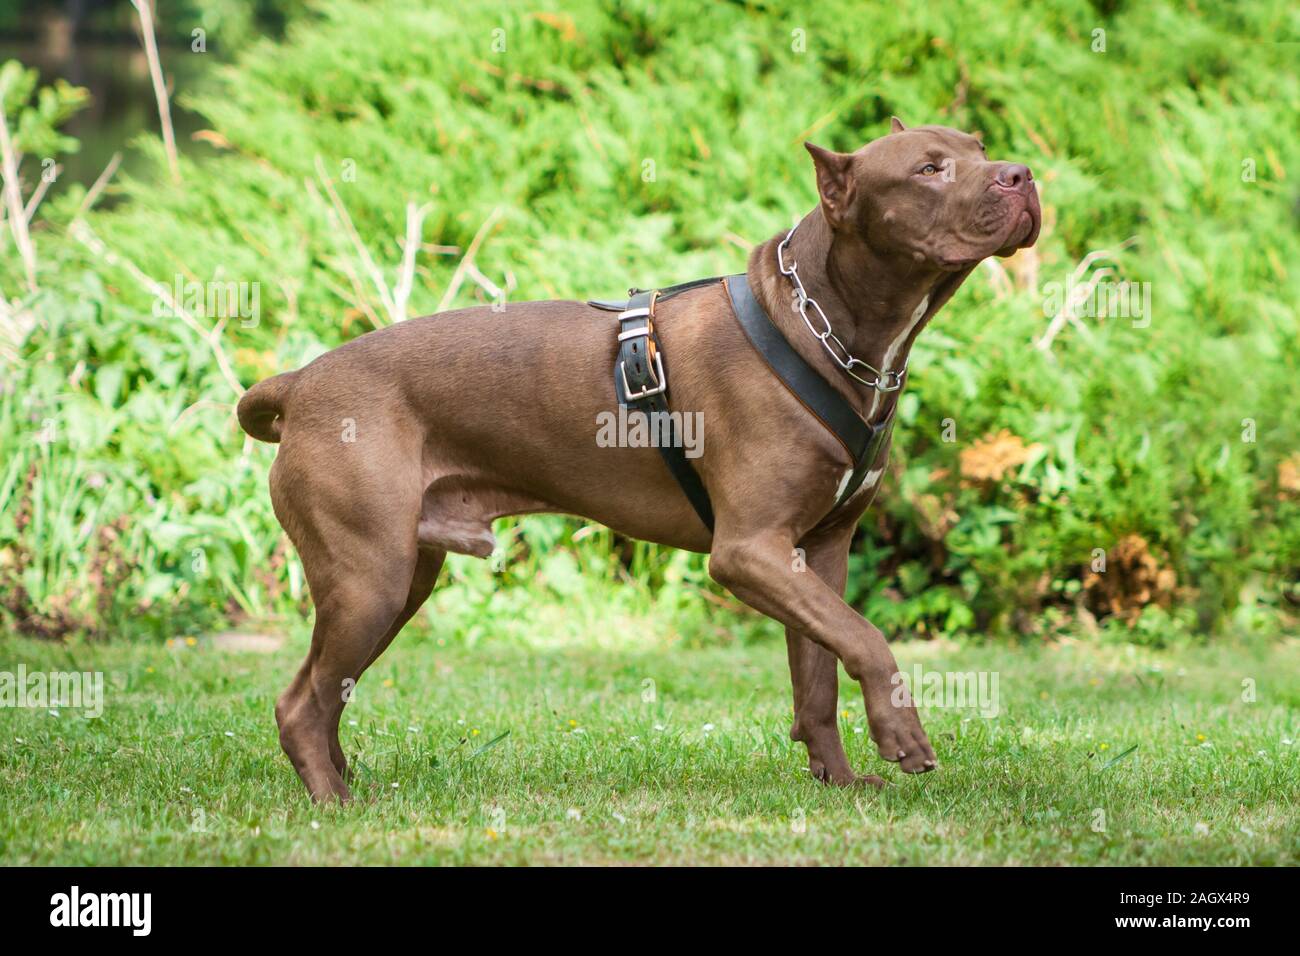 Nez rouge cropped American Bully dog Banque D'Images